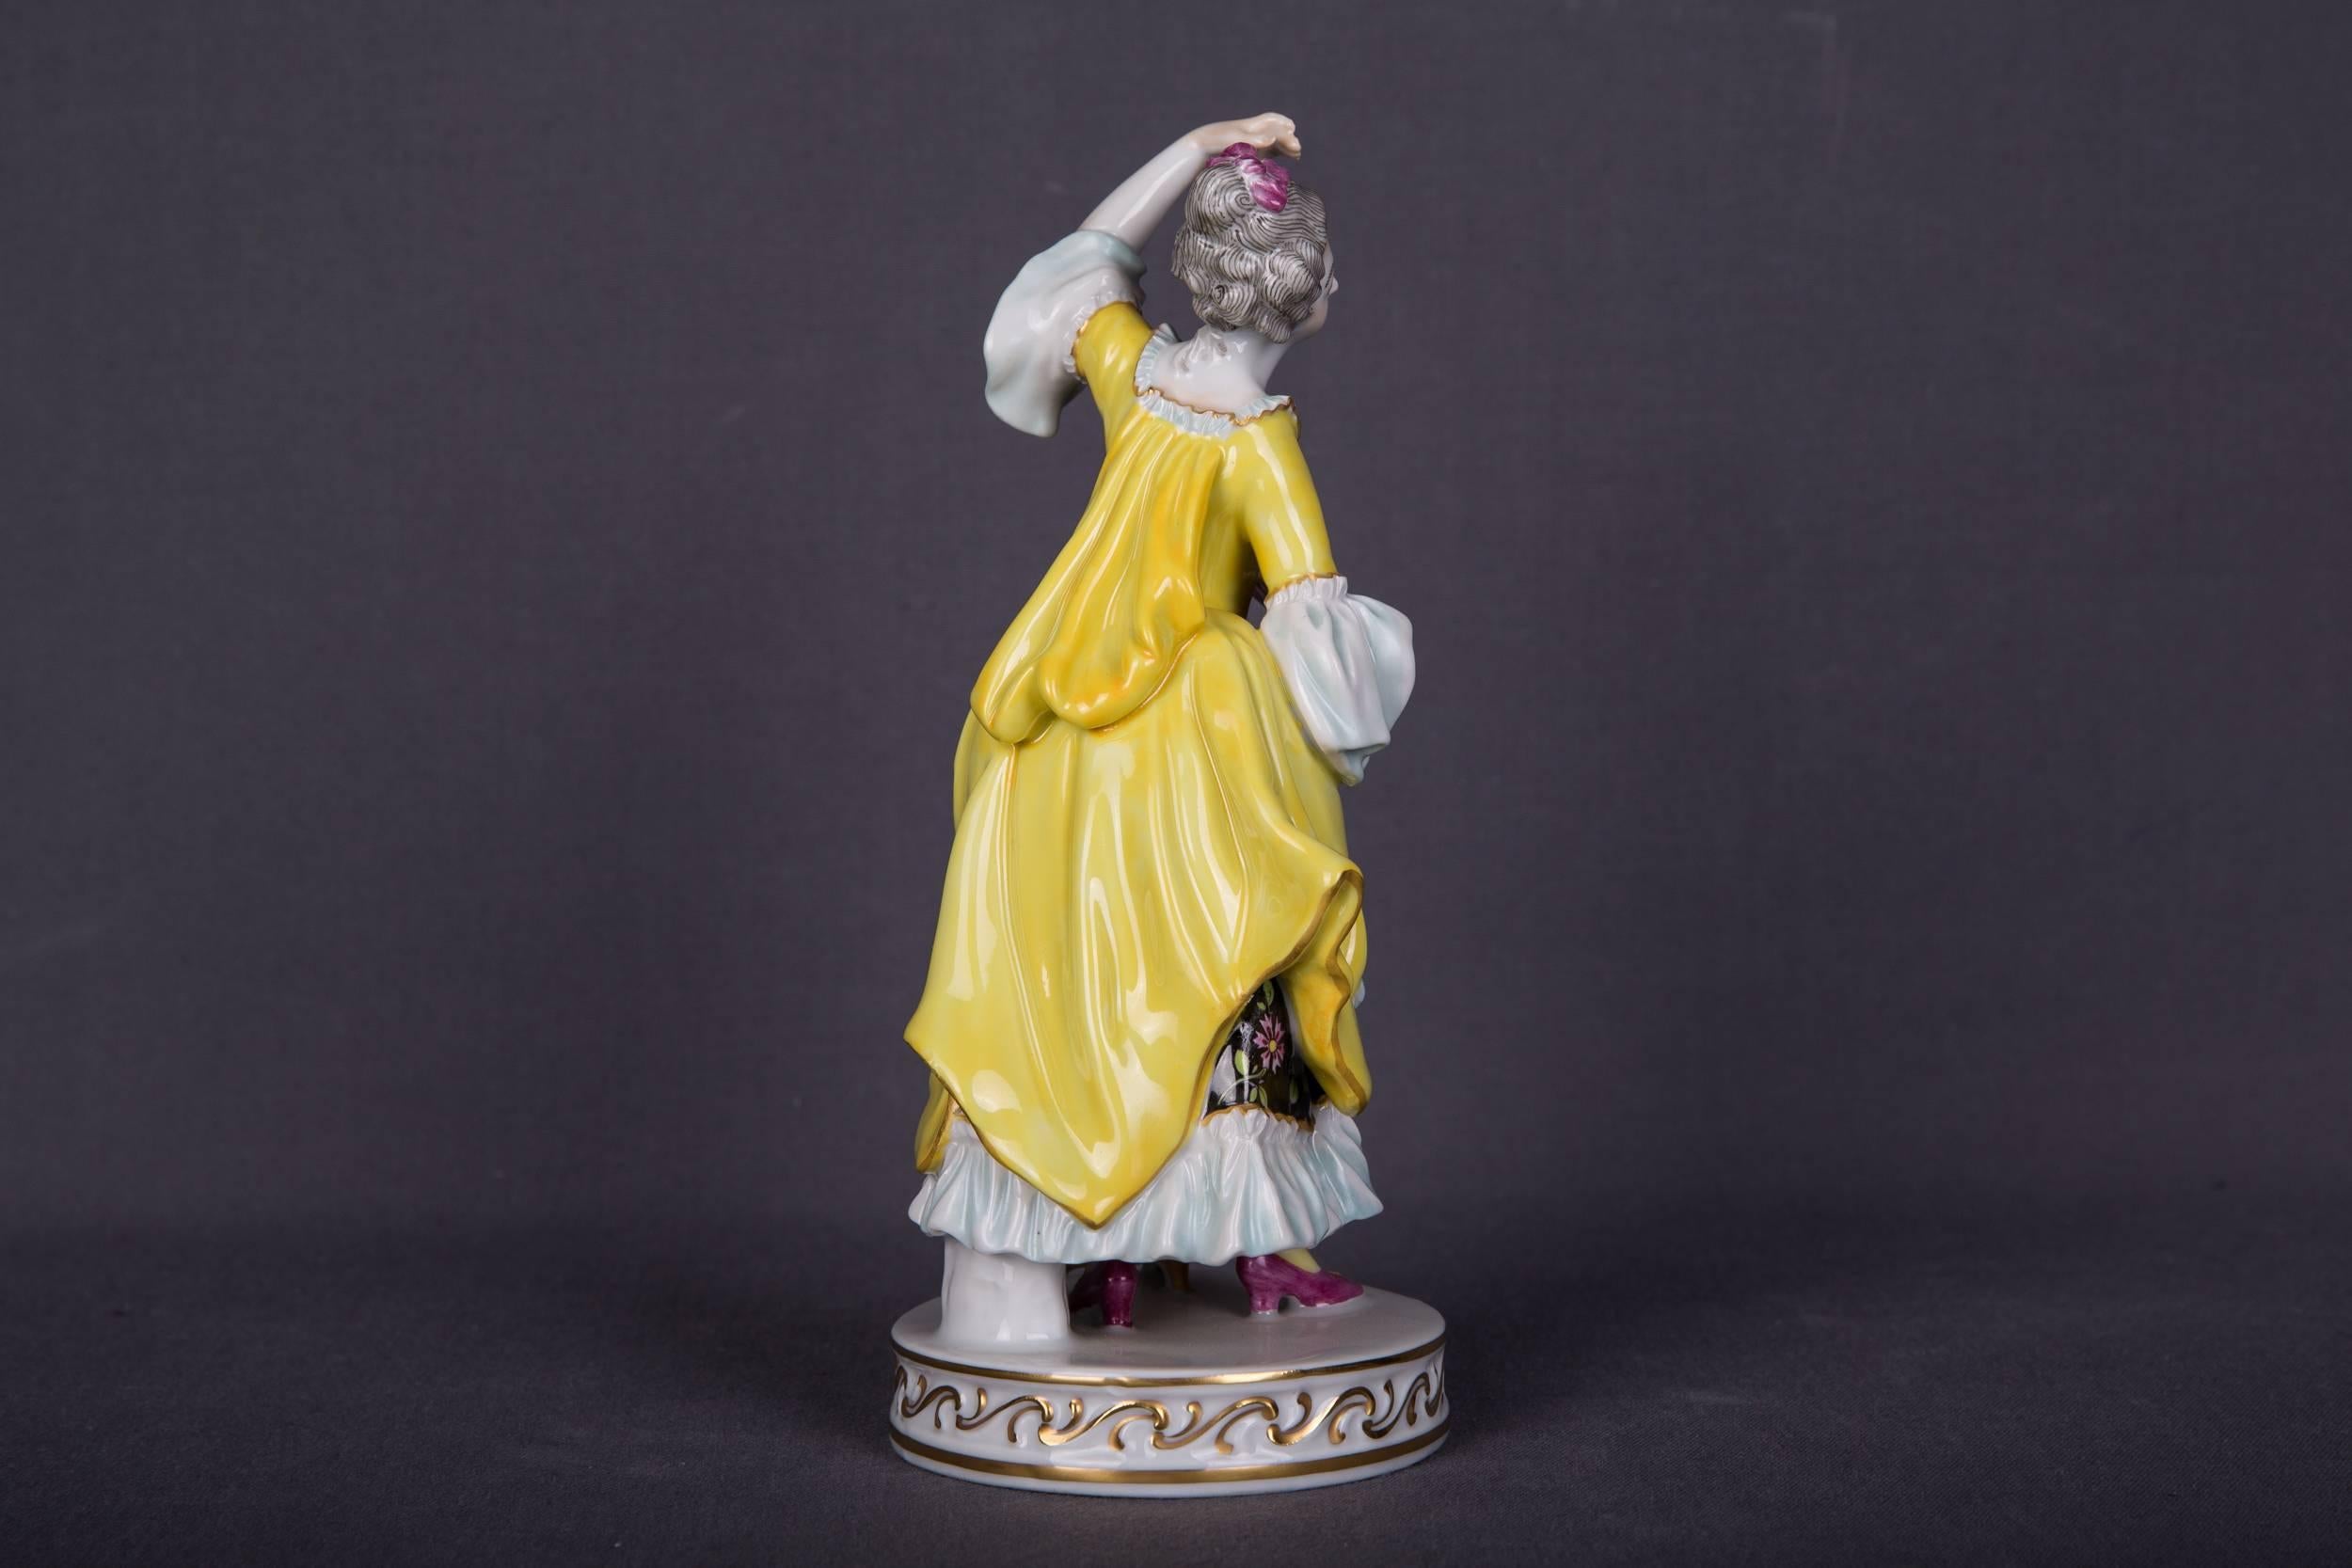 Very elaborate and finely painted.

Very fine finish.
The figure is not damaged and is in a good condition, only on the ground a small glaze.